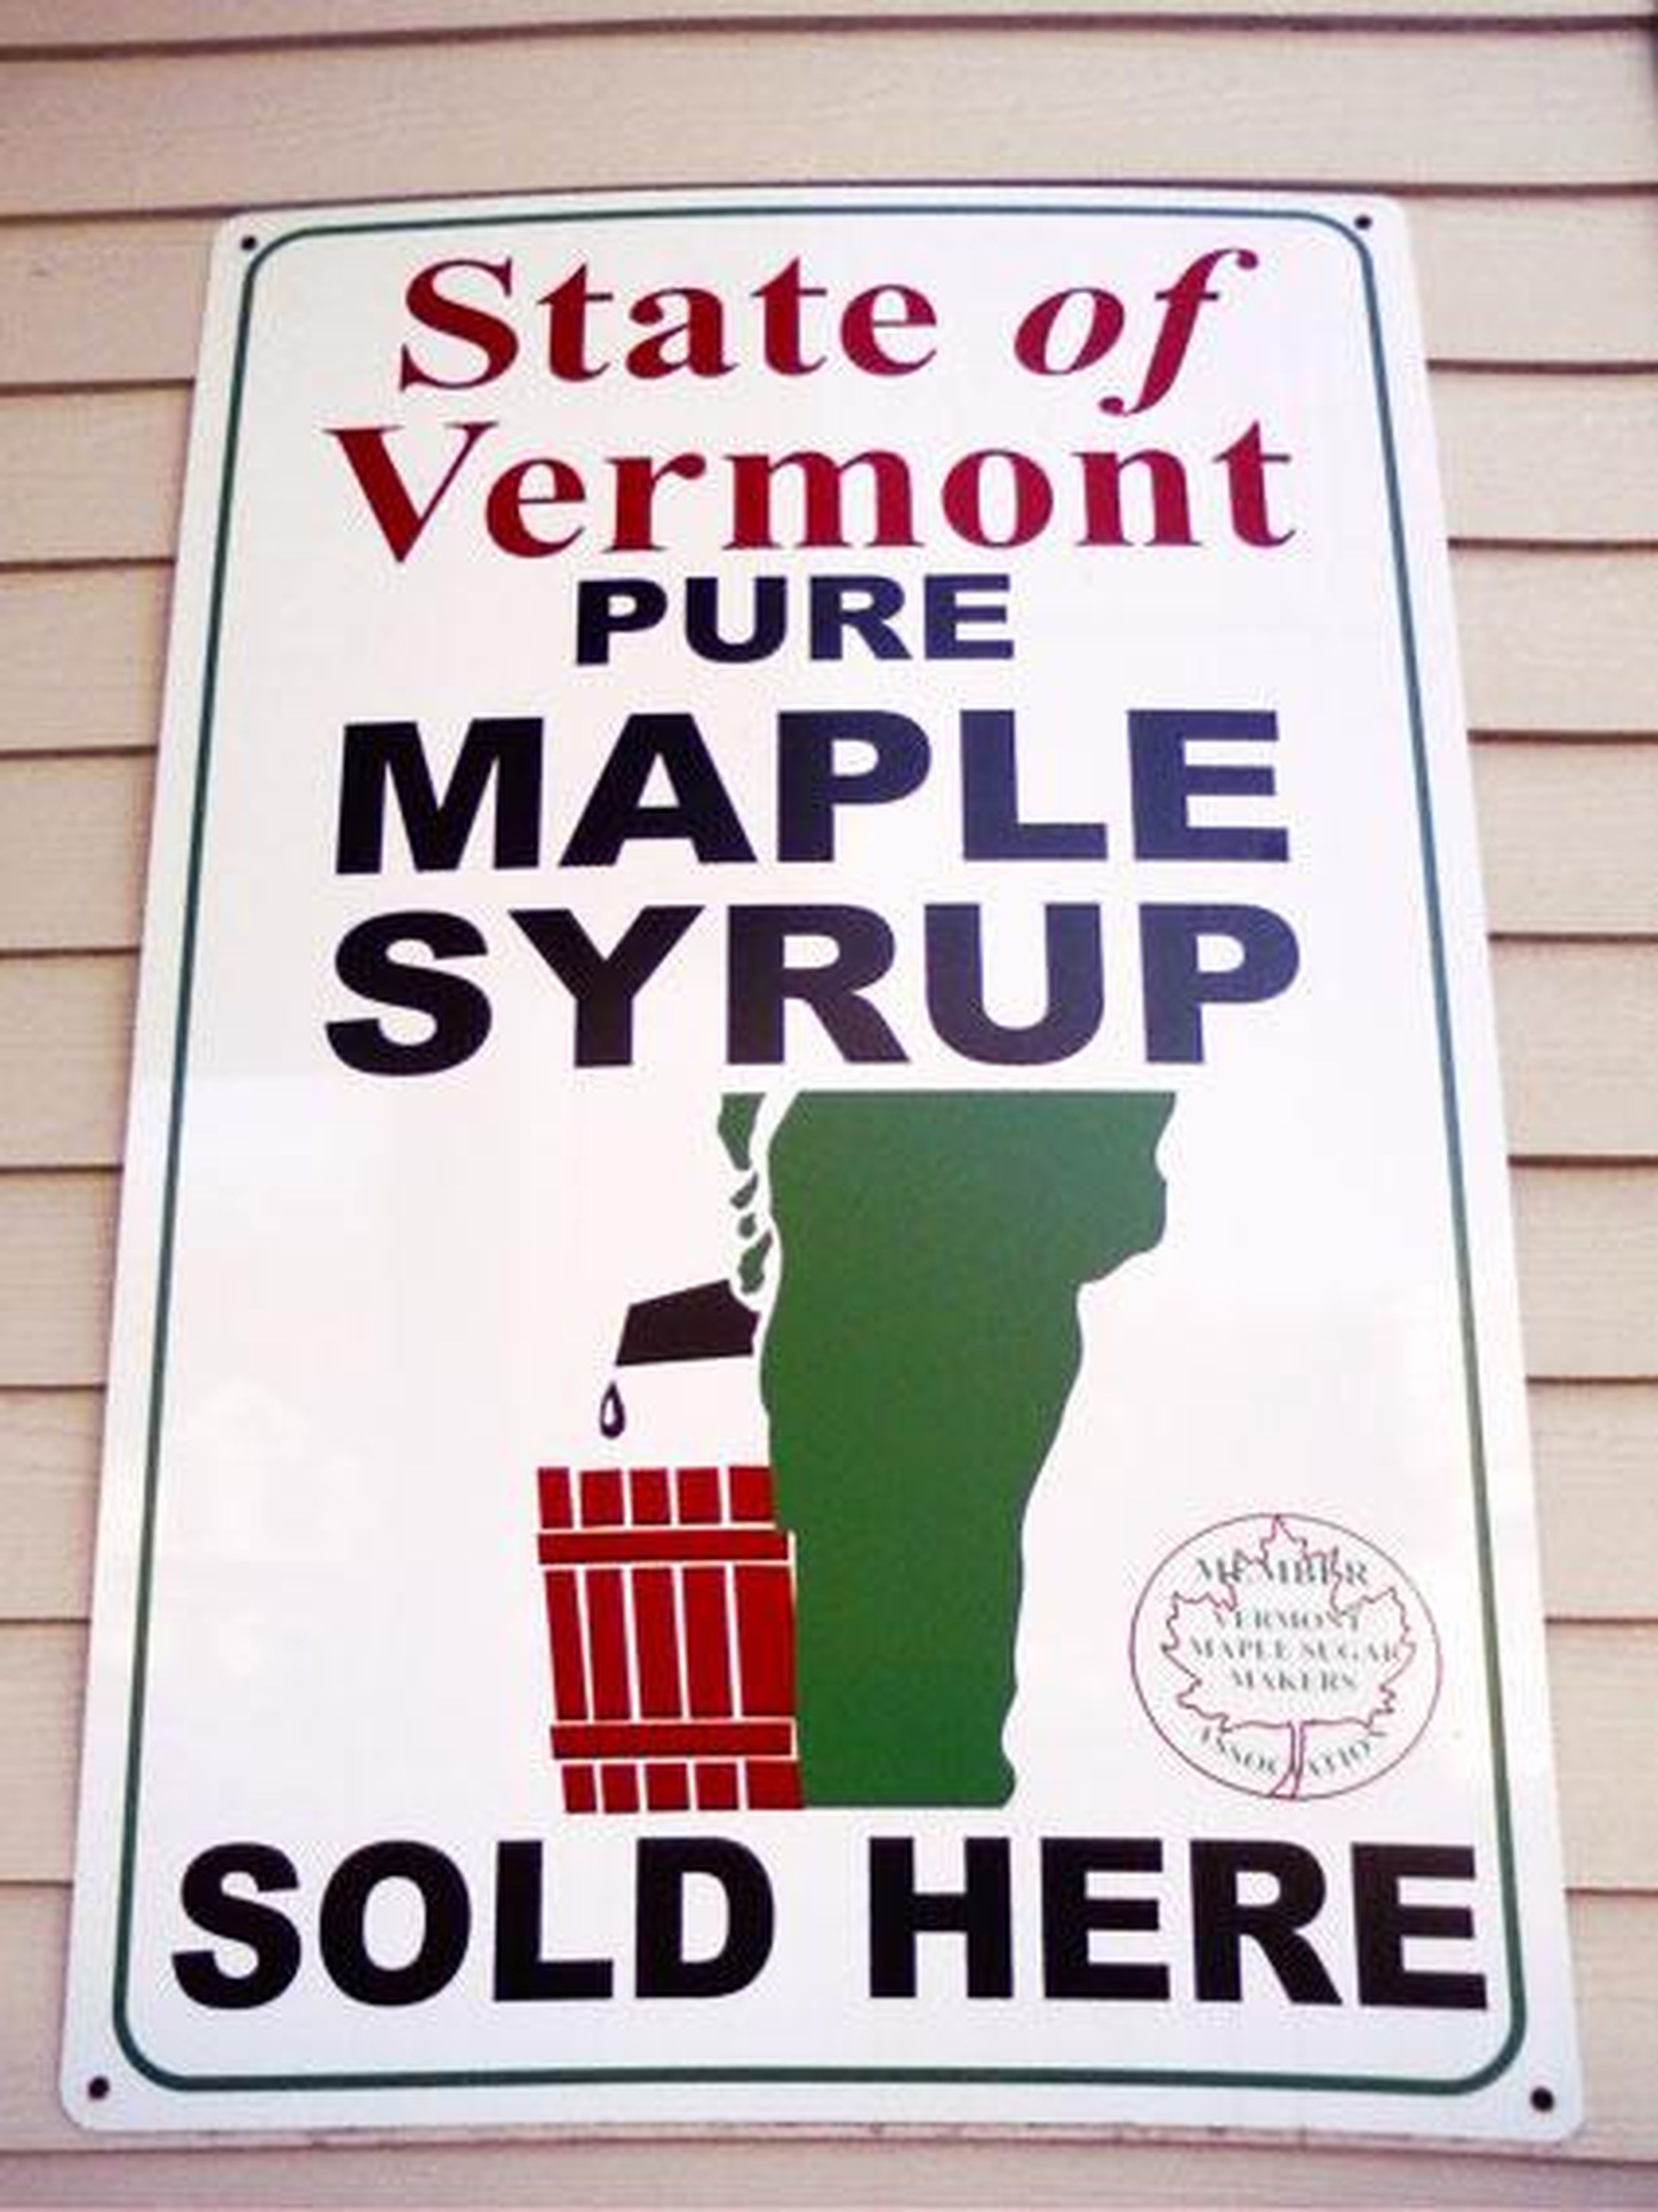 Maple syrup straight from the tap